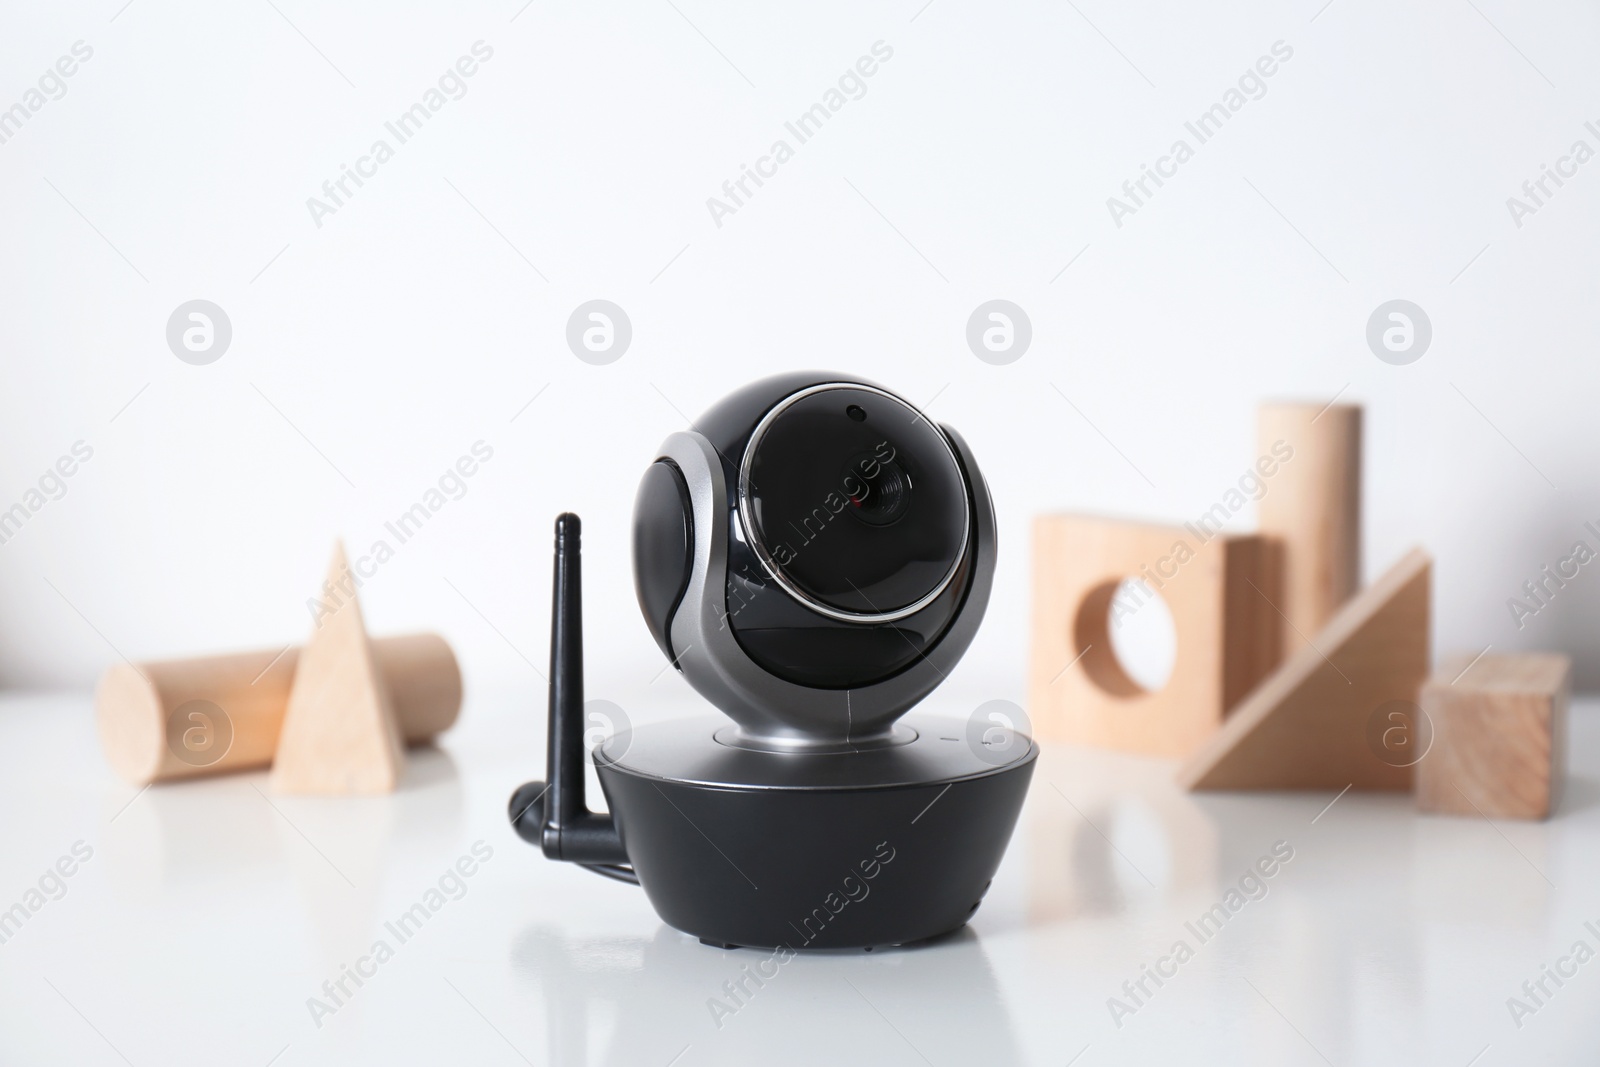 Photo of Modern CCTV security camera and wooden blocks on table